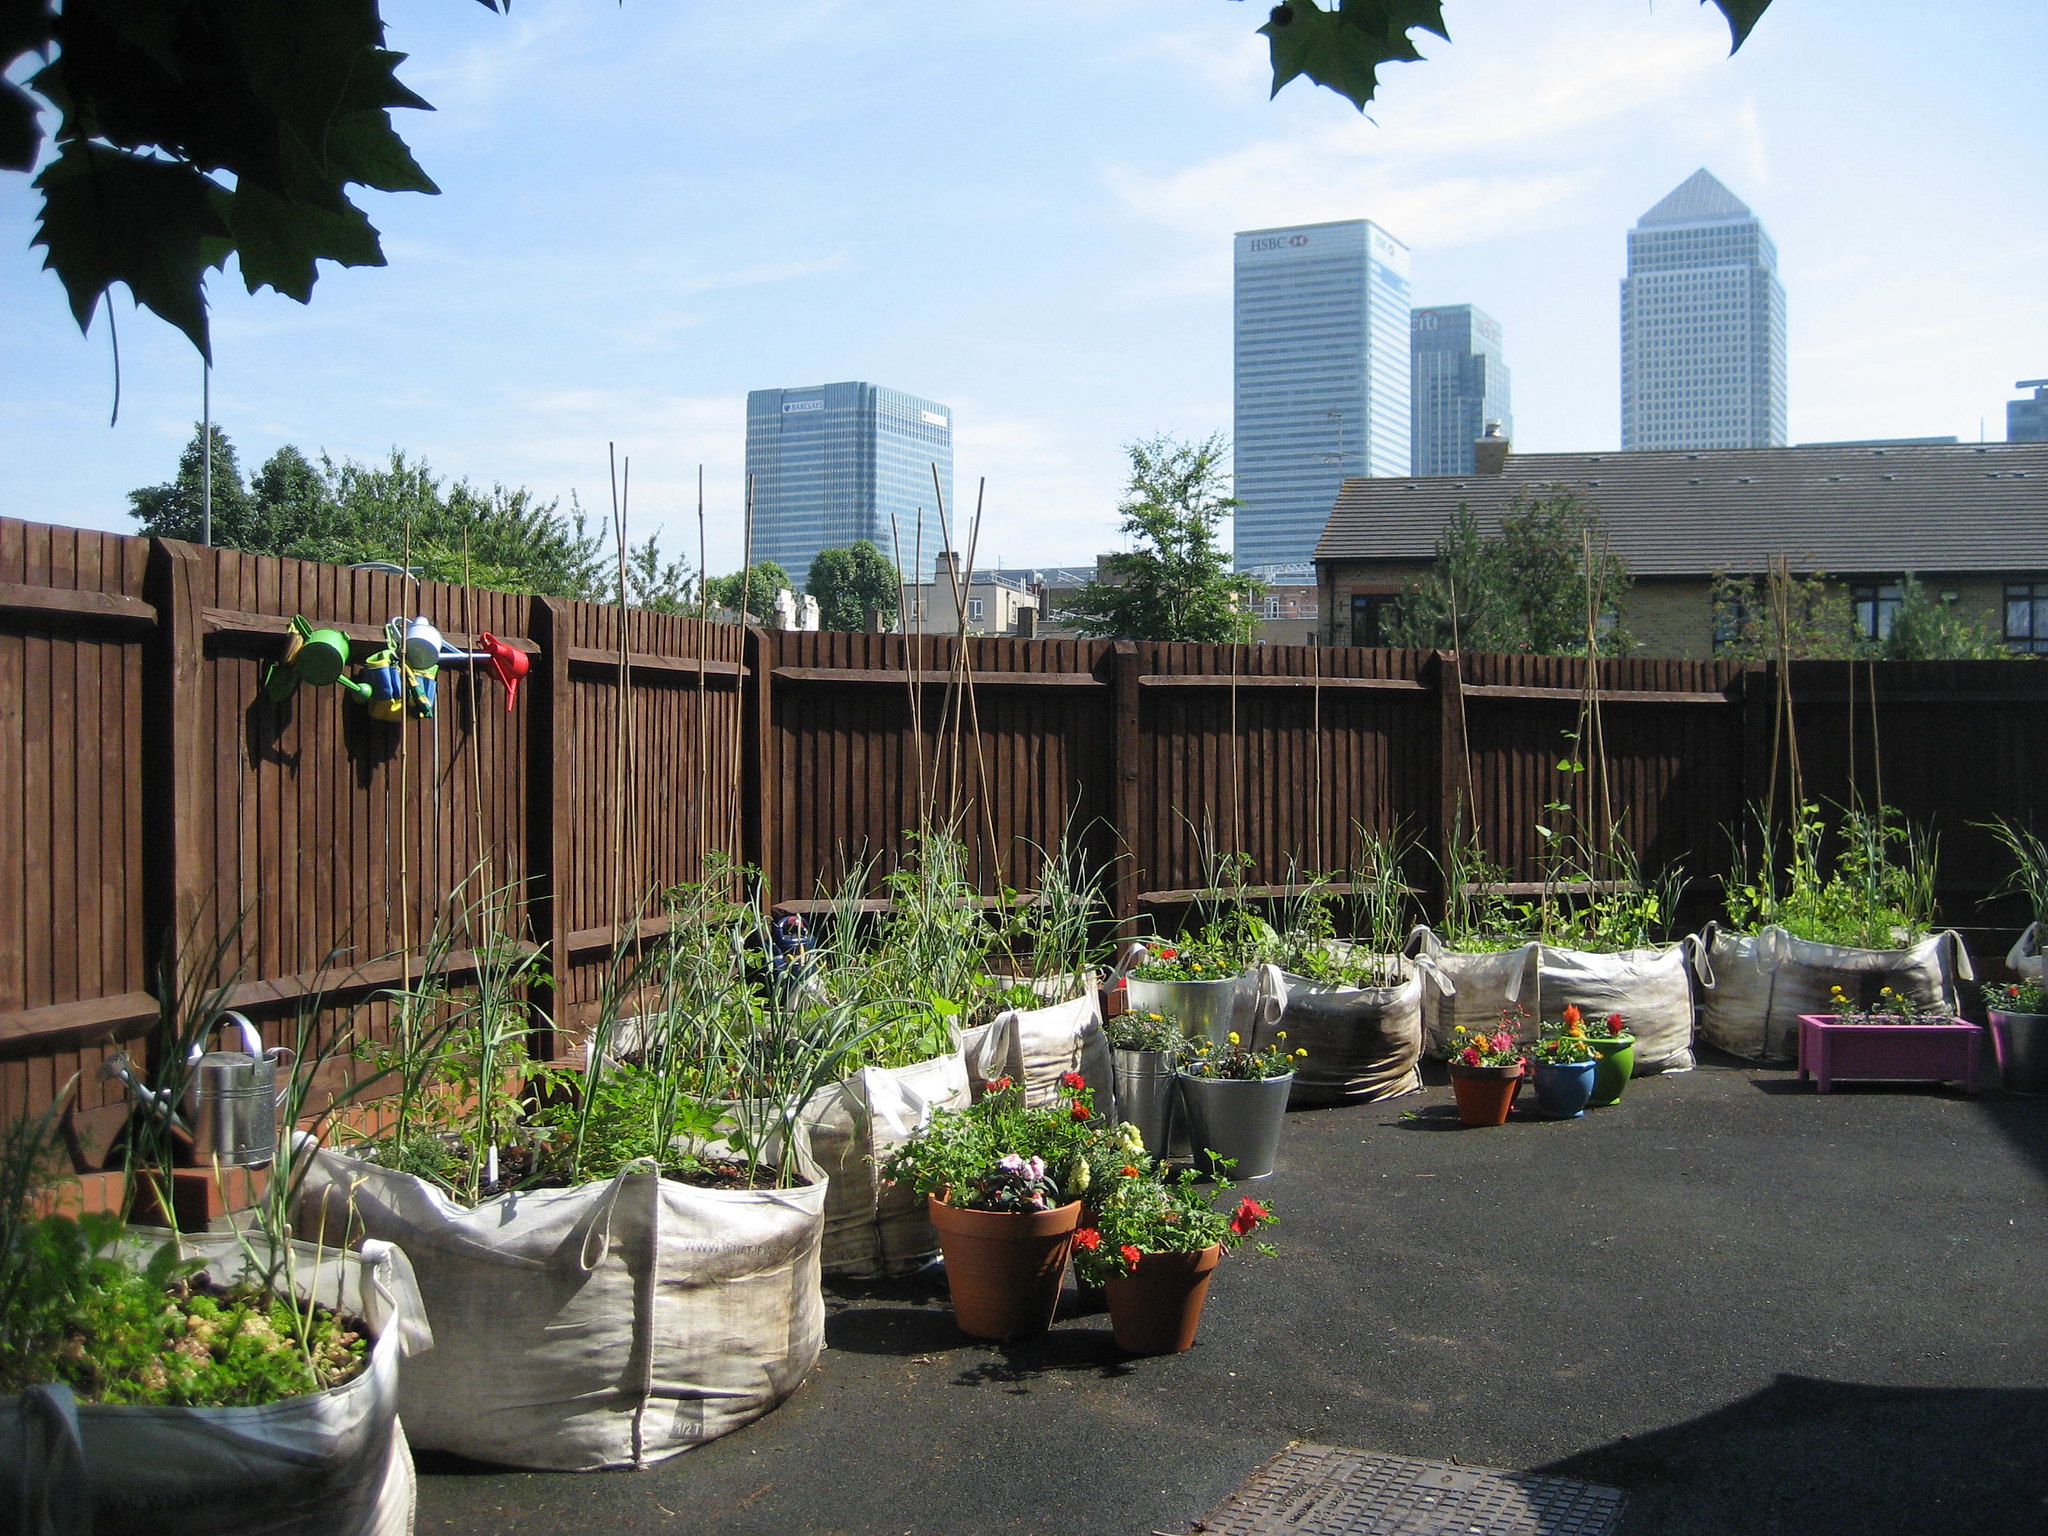 Garden on asphalt using fabric containers.